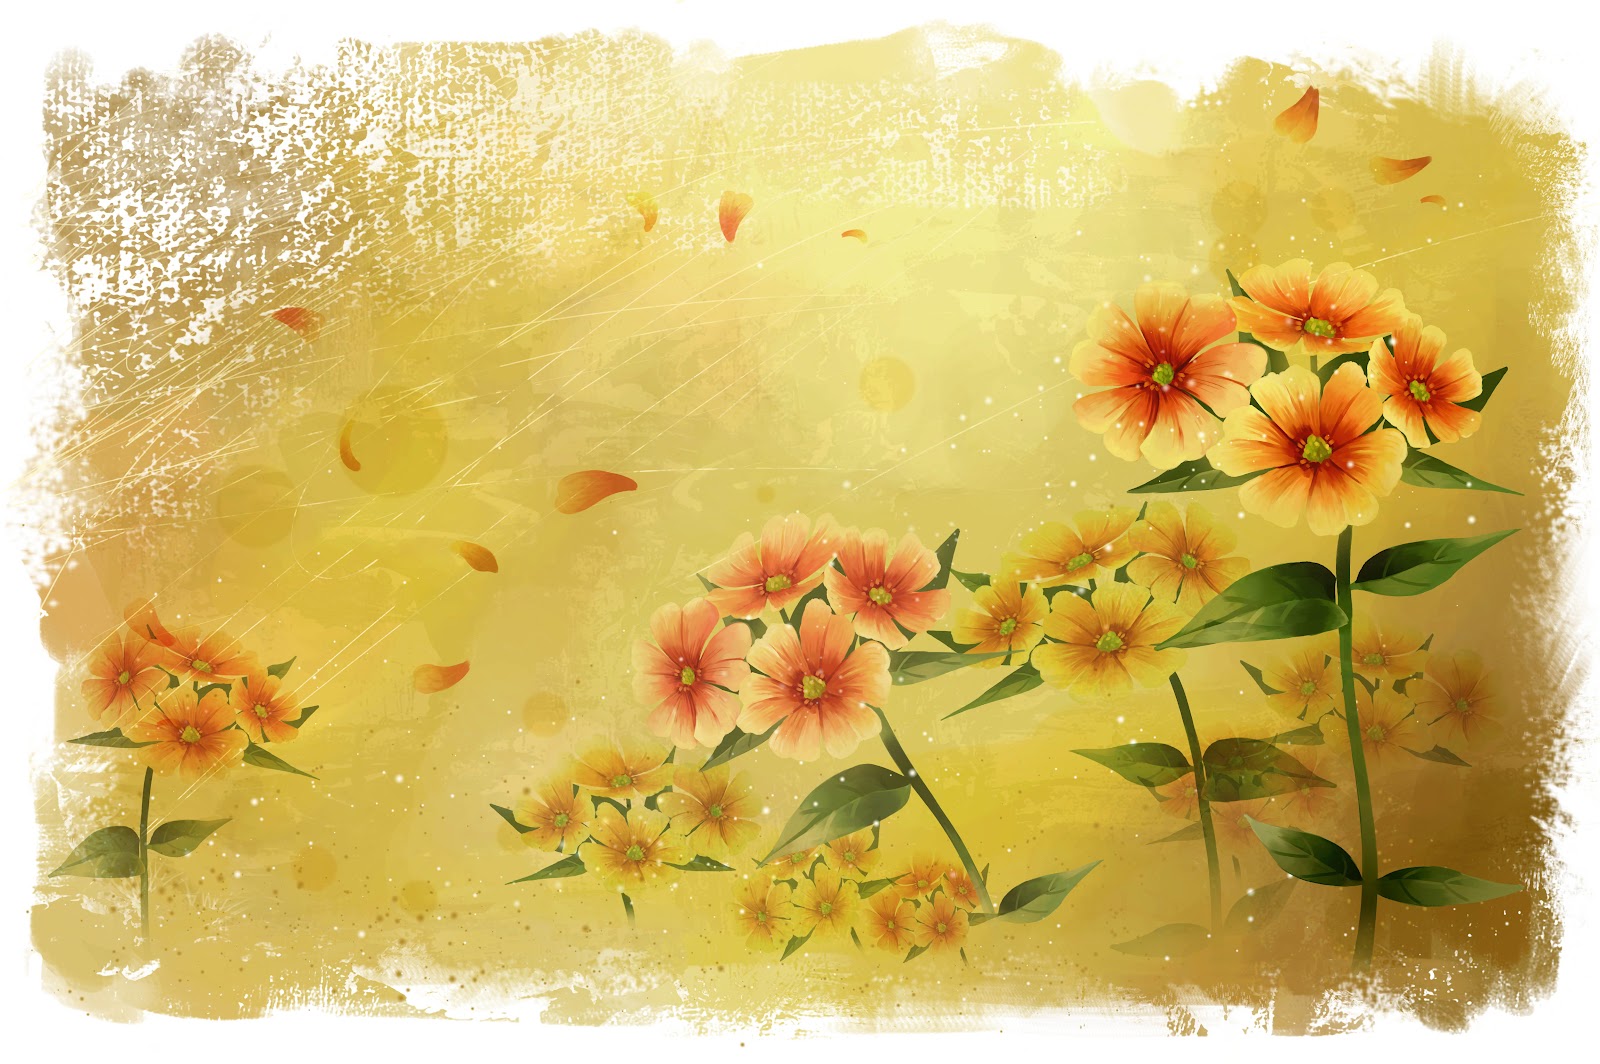 Old style grunge floral backgrounds